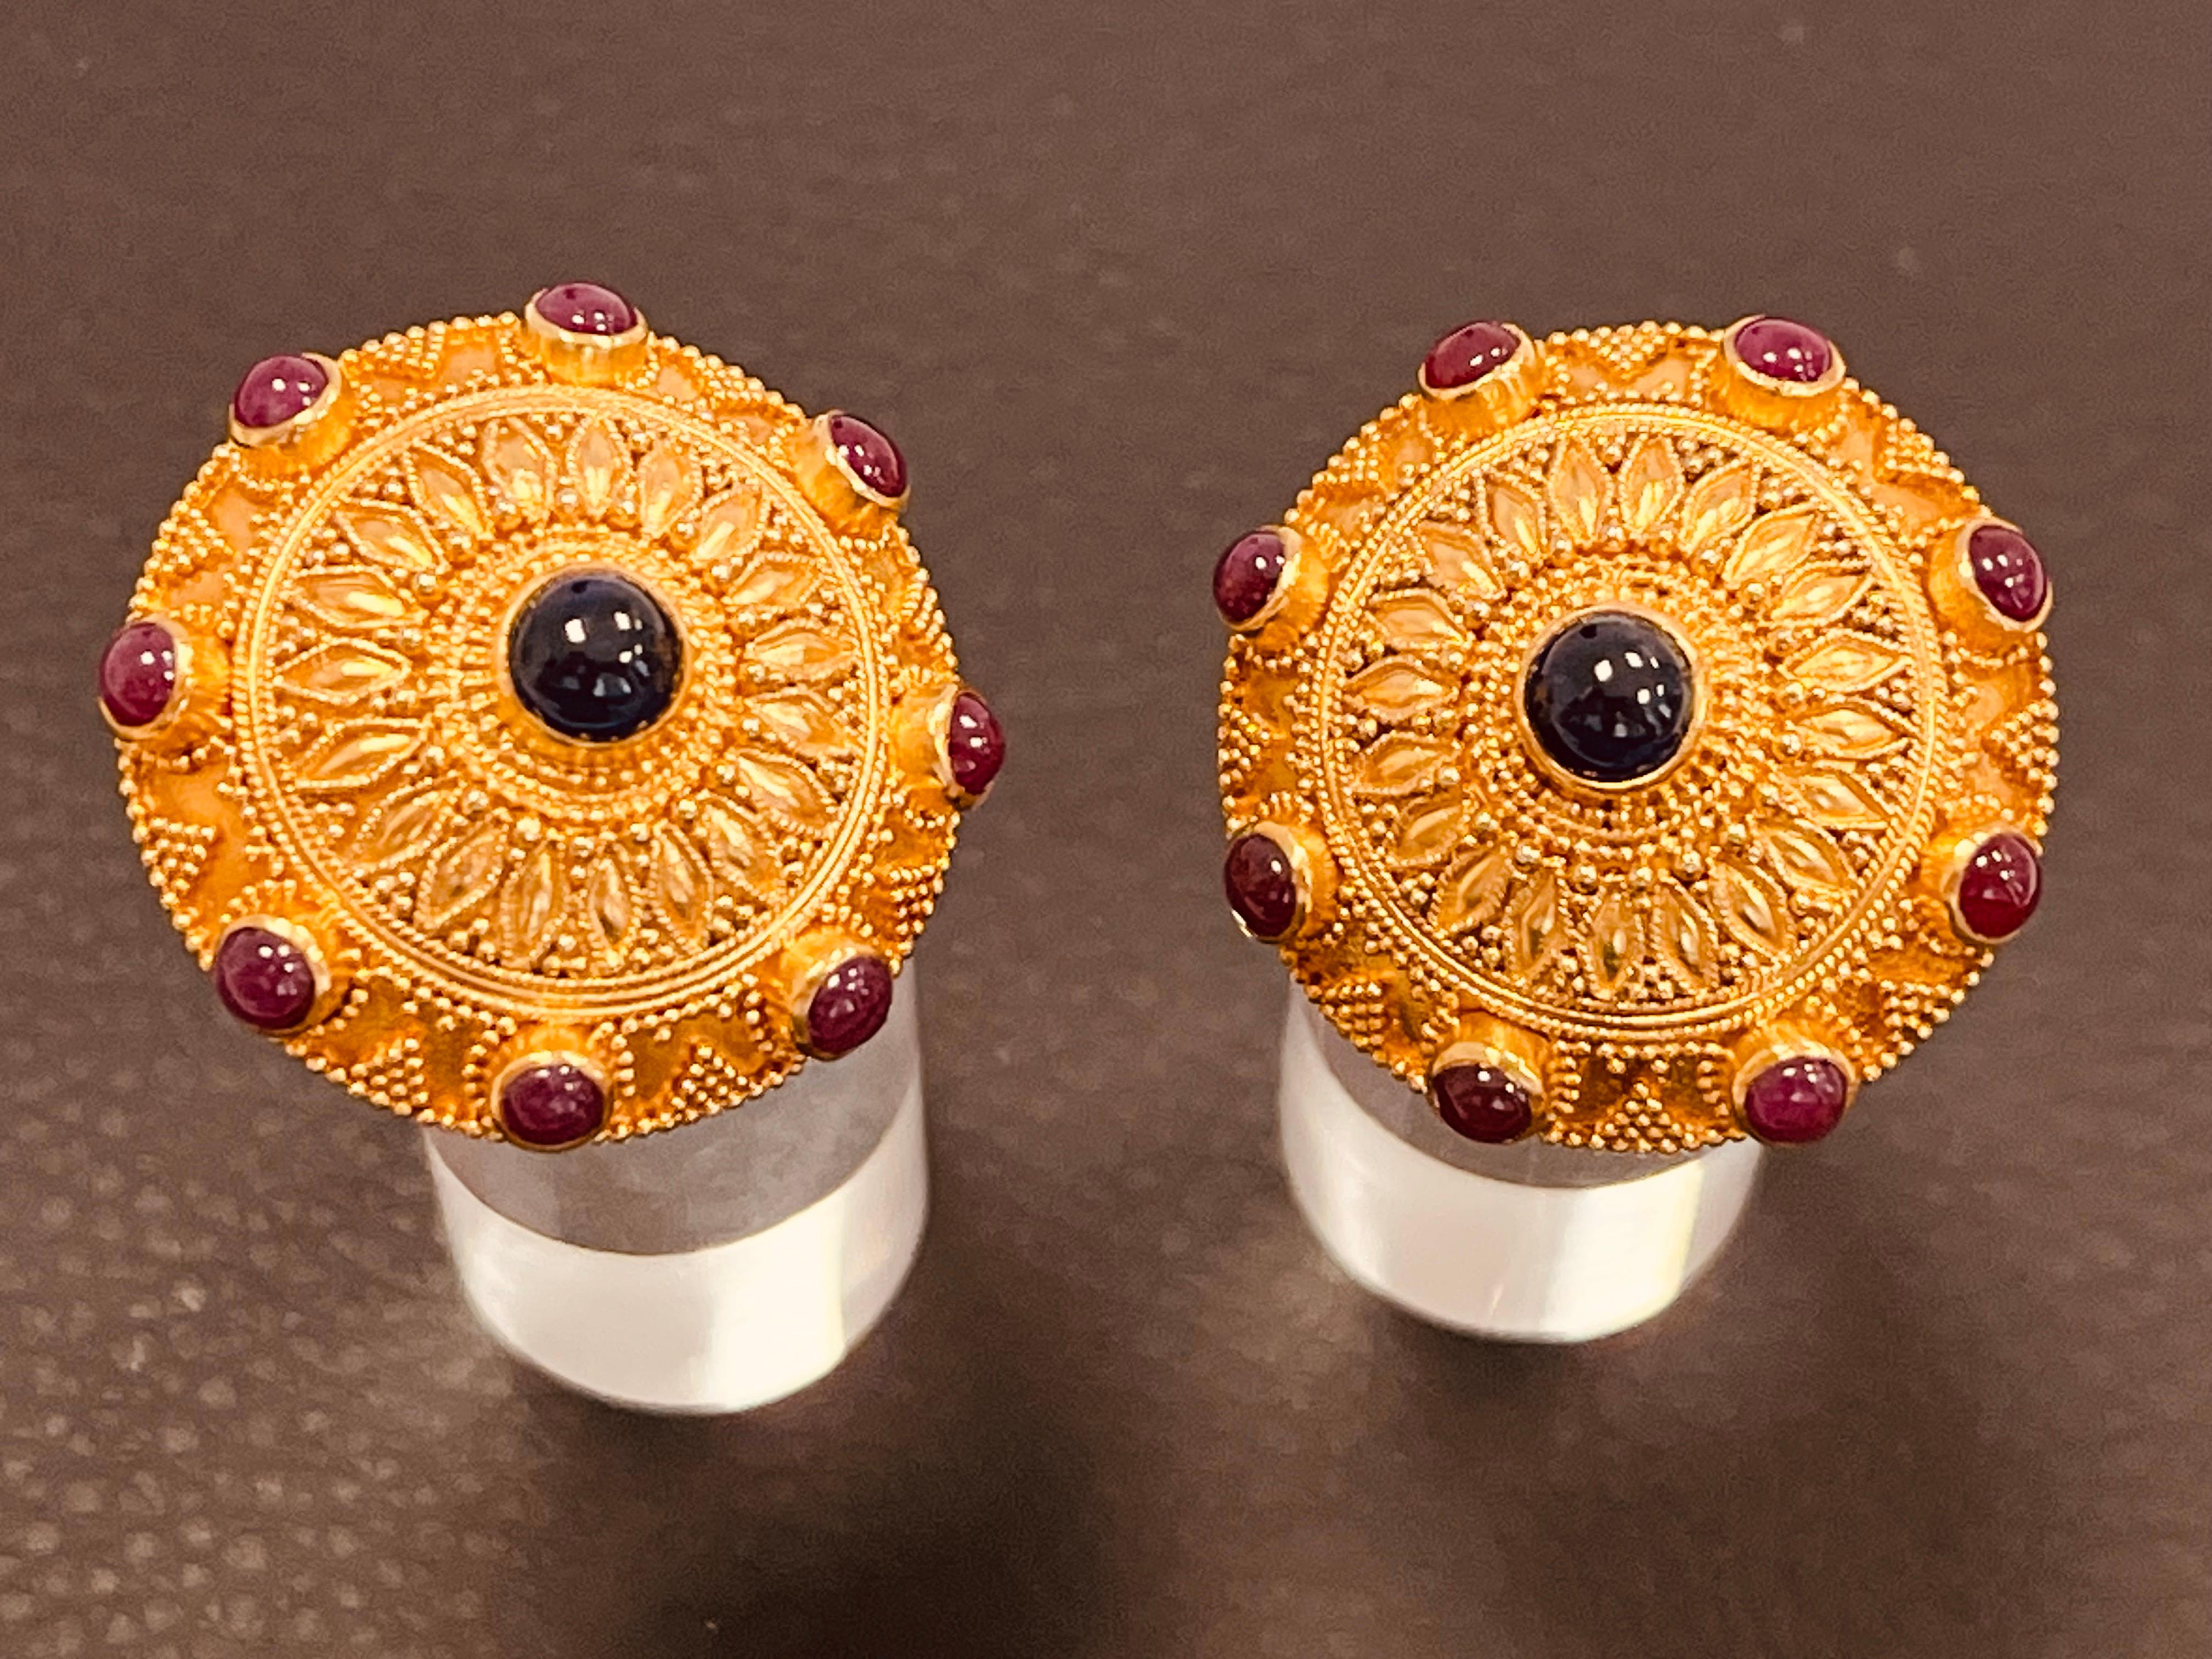 A pair of Byzantine inspired ear clips. High carat gold - between 20-22 carat. The round domed ear clip centering a cabochon sapphire and cabochon ruby border. The whole decorated with filigree and granulation work. The back lightly hammered with